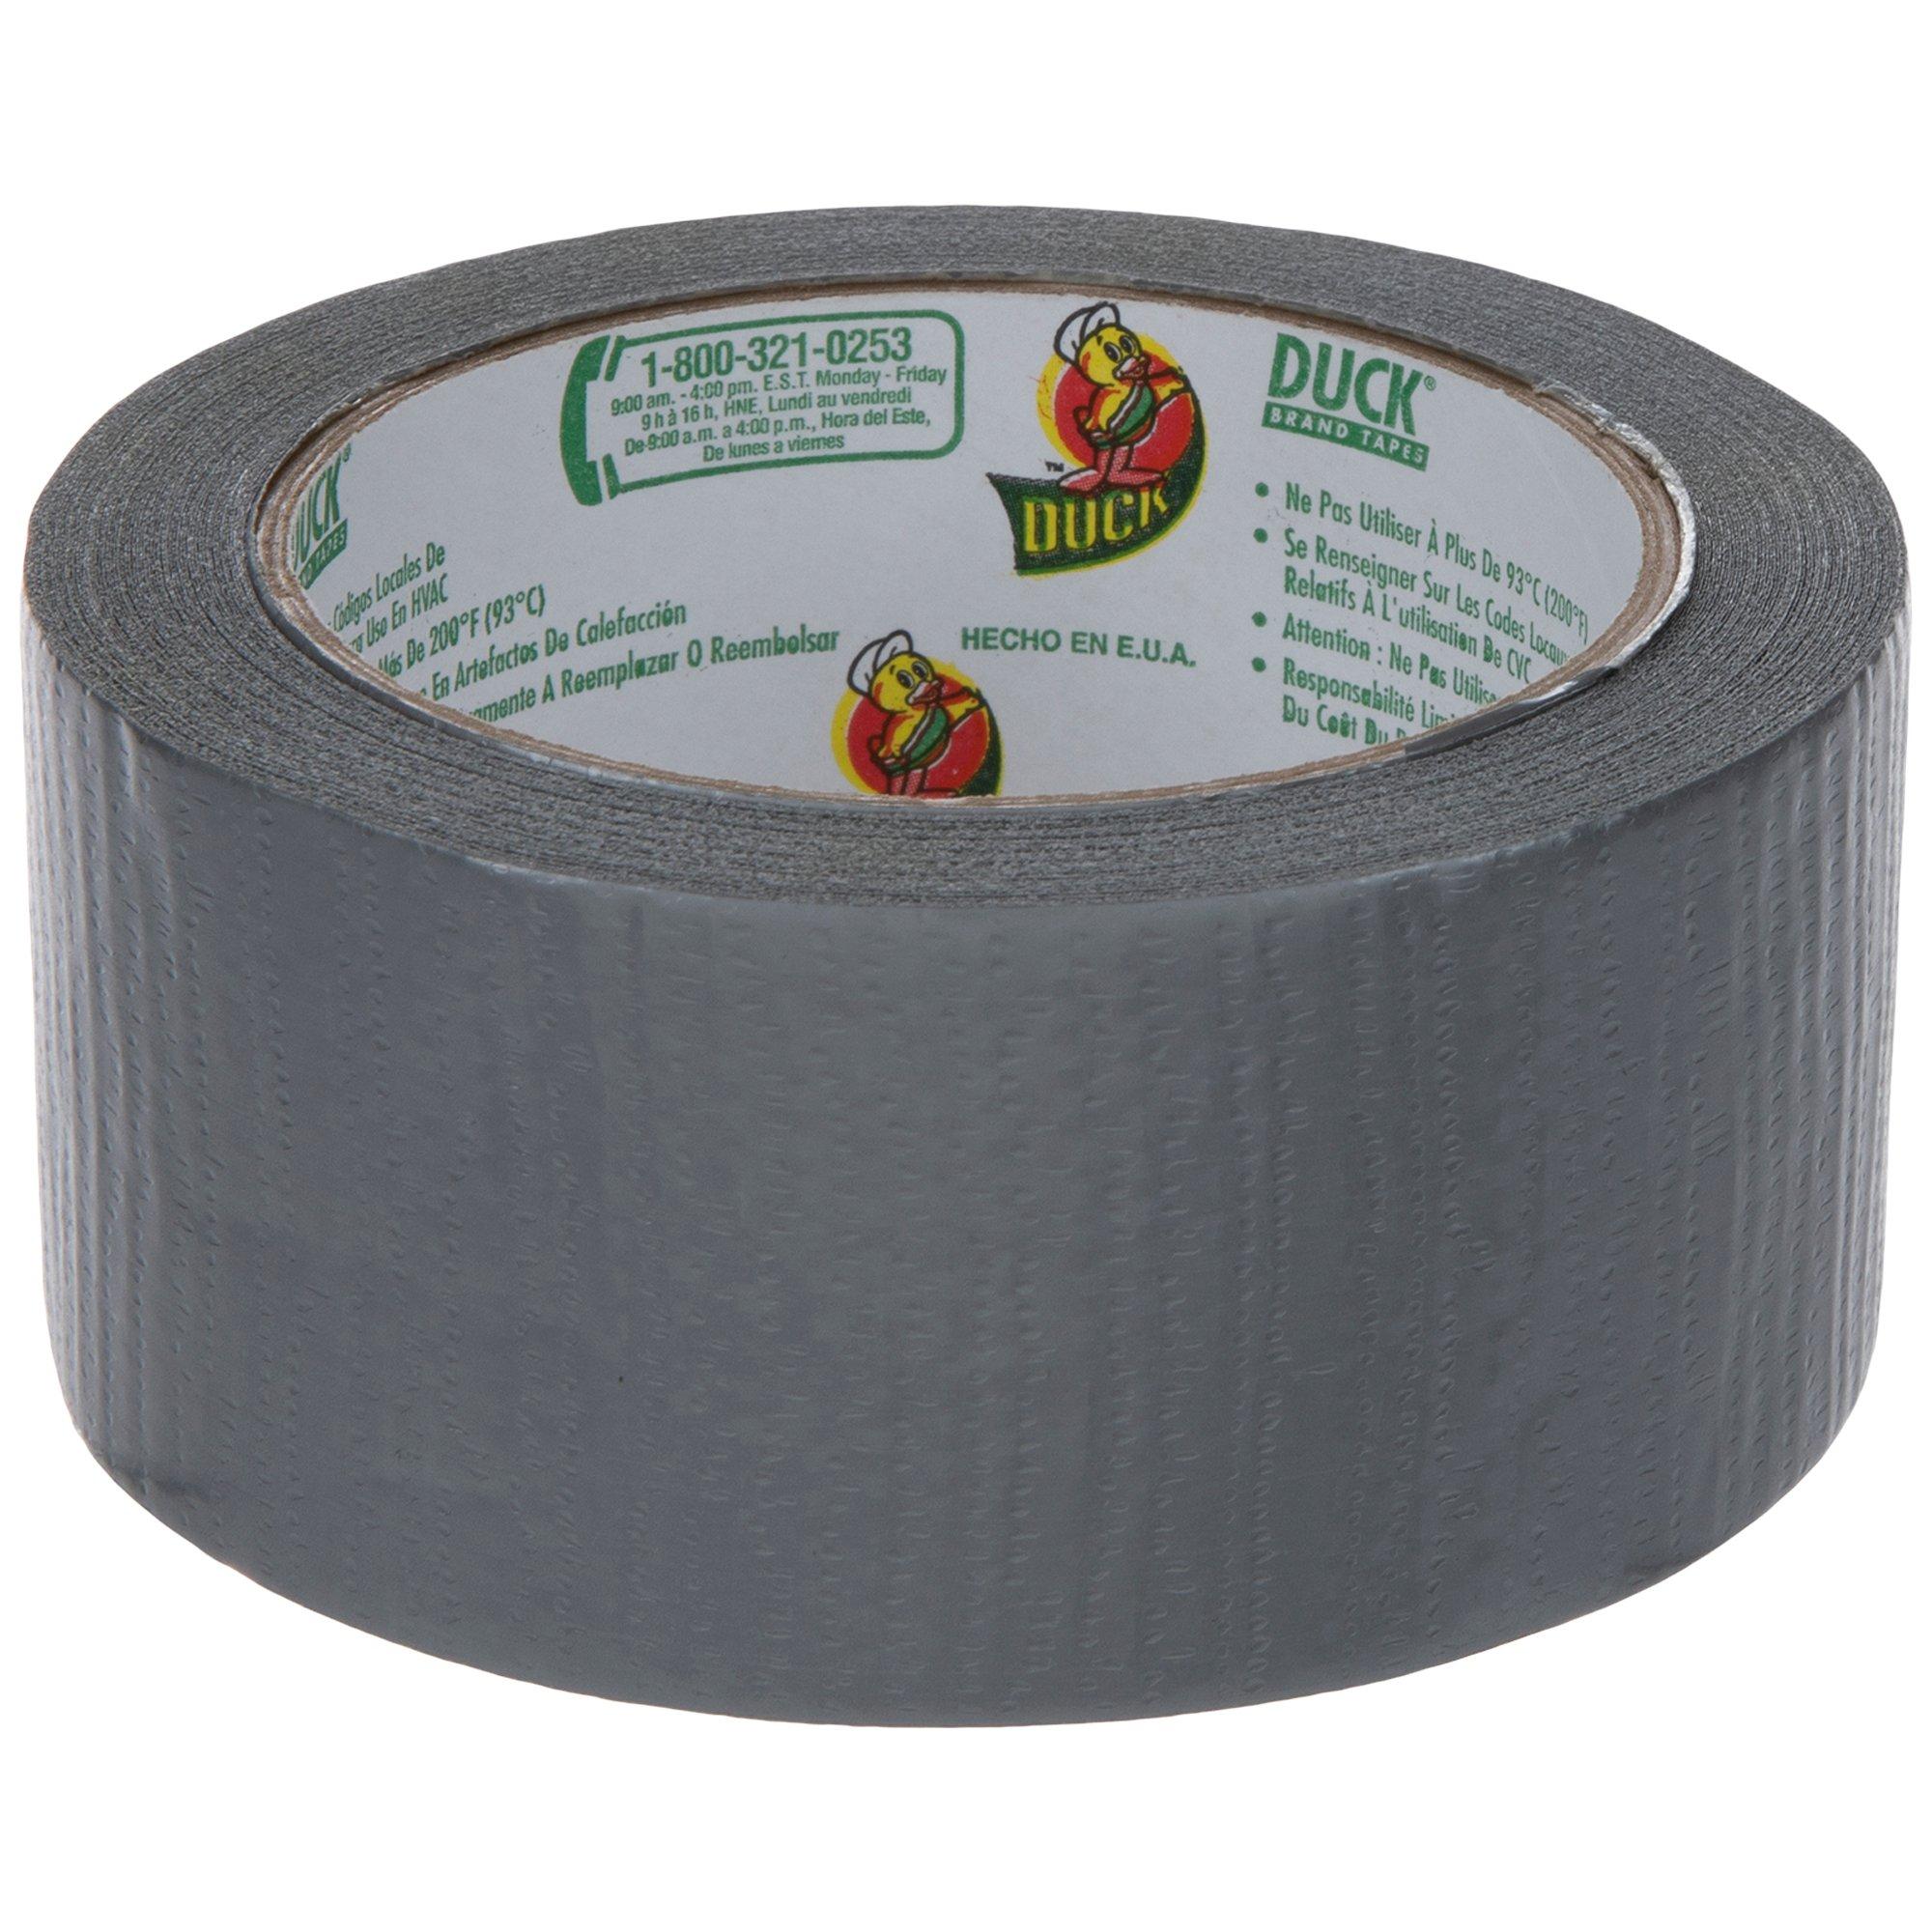 Transparent Tints Duck Brand Duct Tape